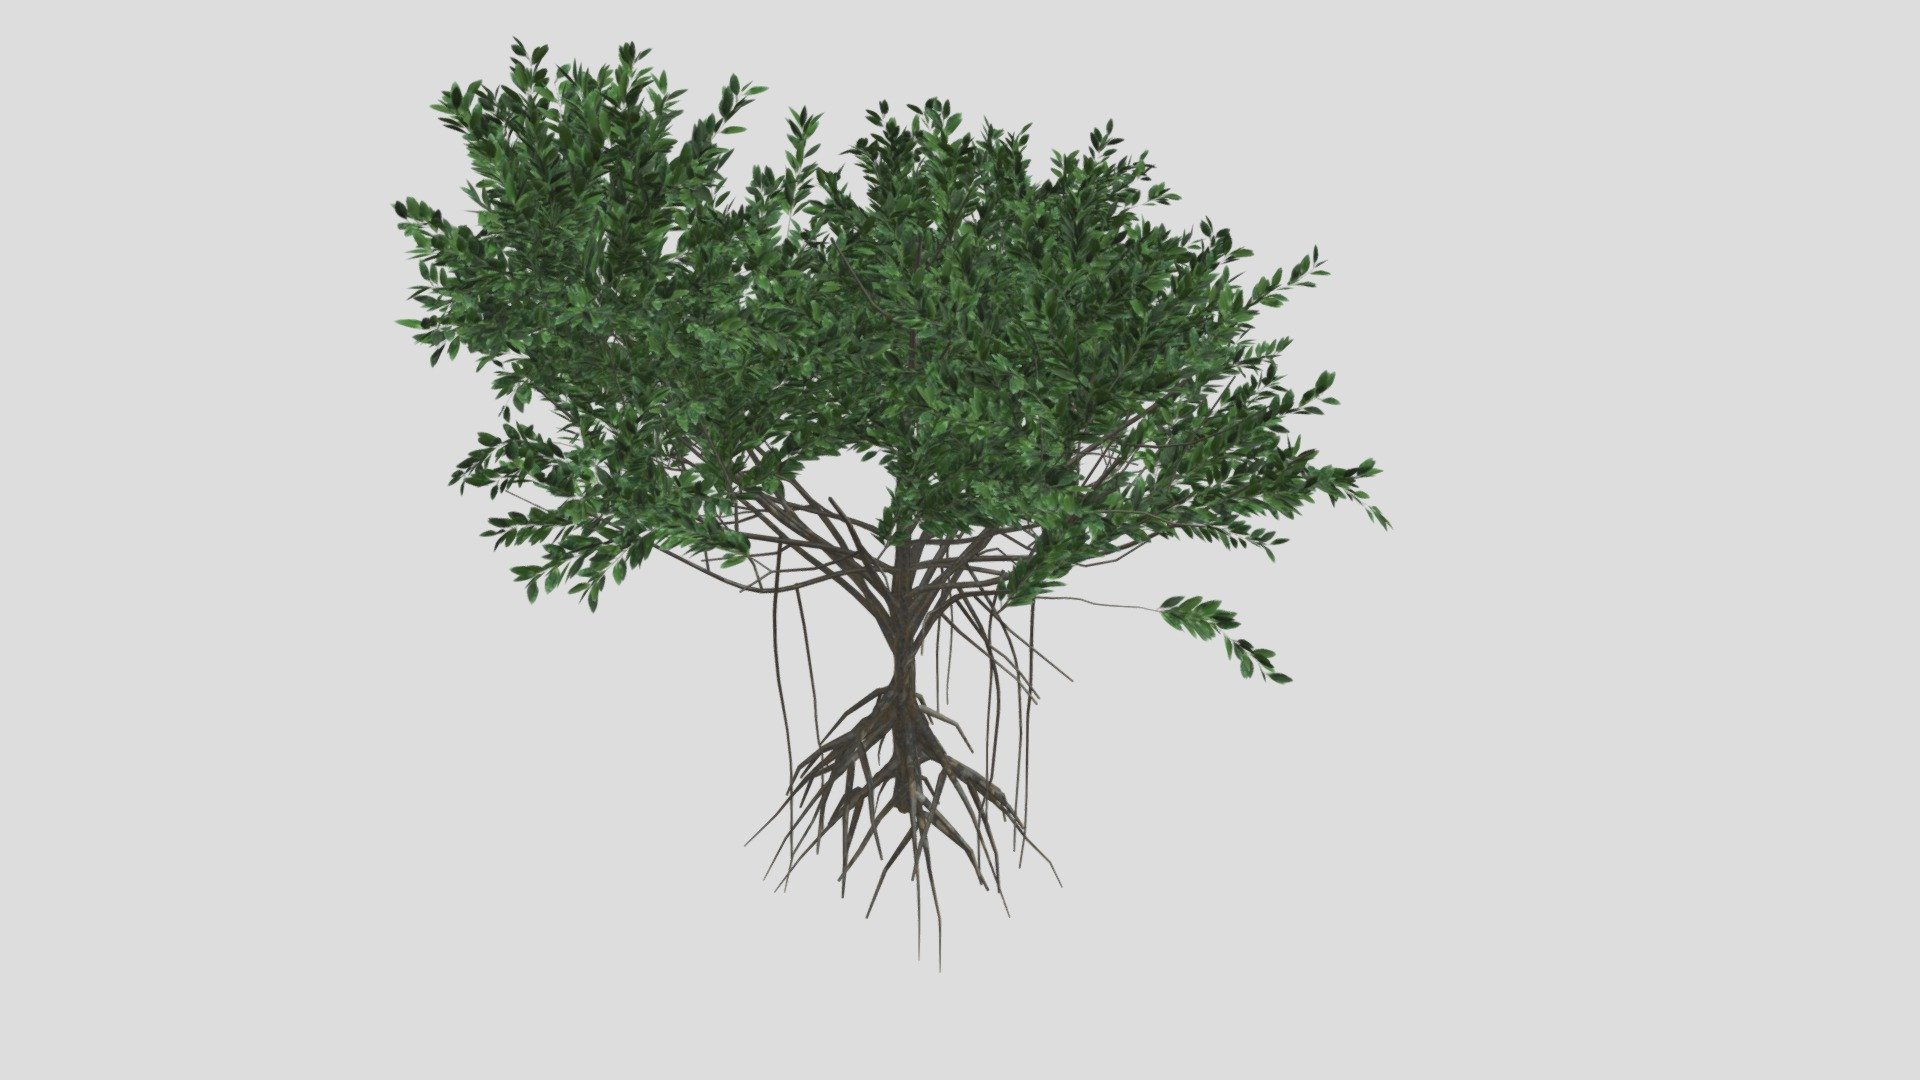 GOBOTREE

A high quality 3d model of a mangrove tree C (Rhizophora mangle).

| Model dimensions : 2.9m2.95m2.94m

| Mesh details â€“ 298372 faces , 253187 vertices

| It comes with PBR ready textures - Diffuse, Albedo, AO, Metalness /Specular, Normal, Roughness maps. Other formats available upon request.

| Formats 3ds max 2015 with a Vray materials FBX OBJ

Object suitable for architectural and landscape visualisations and presentations. Please let us know, if we can improve our models or if you need us to adapt to specific needs!

We take custom orders for specific species!

Find more assets on Gobotree! - GTV mangrove tree C - Buy Royalty Free 3D model by Gobotree-3D-Assets 3d model